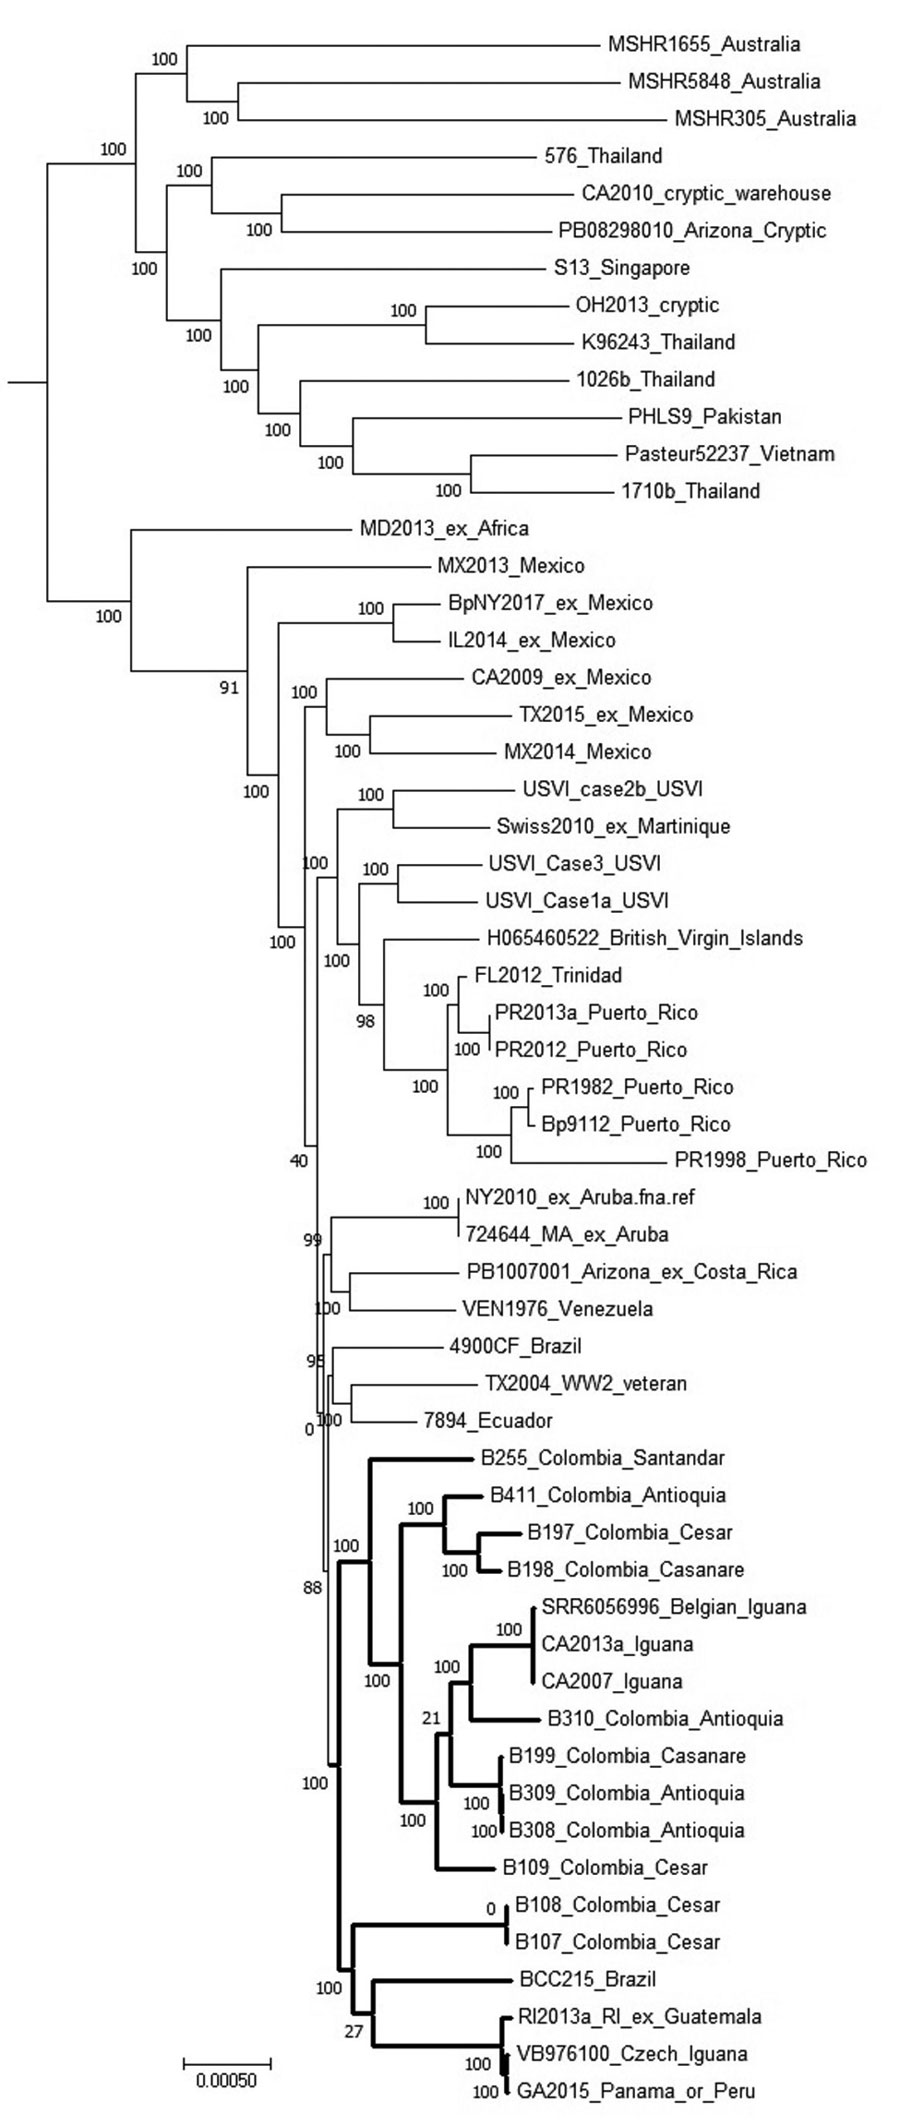 Dendrogram used for characterization of Burkholderia pseudomallei genomes from Colombia compared with reference genomes. Tree was generated in MEGA7 software (http://www.megasoftware.net) from results of maximum-parsimony phylogenetic analysis of core single-nucleotide polymorphisms conducted by using Parsnp, a component of the Harvest 1.3 software suite (https://github.com). Bold branches indicate the subclade containing the examples from Colombia along with reference genomes that group with them. Isolates from Colombia also include the department where they originated. Scale bar indicates number of substitutions per single nucleotide polymorphism.